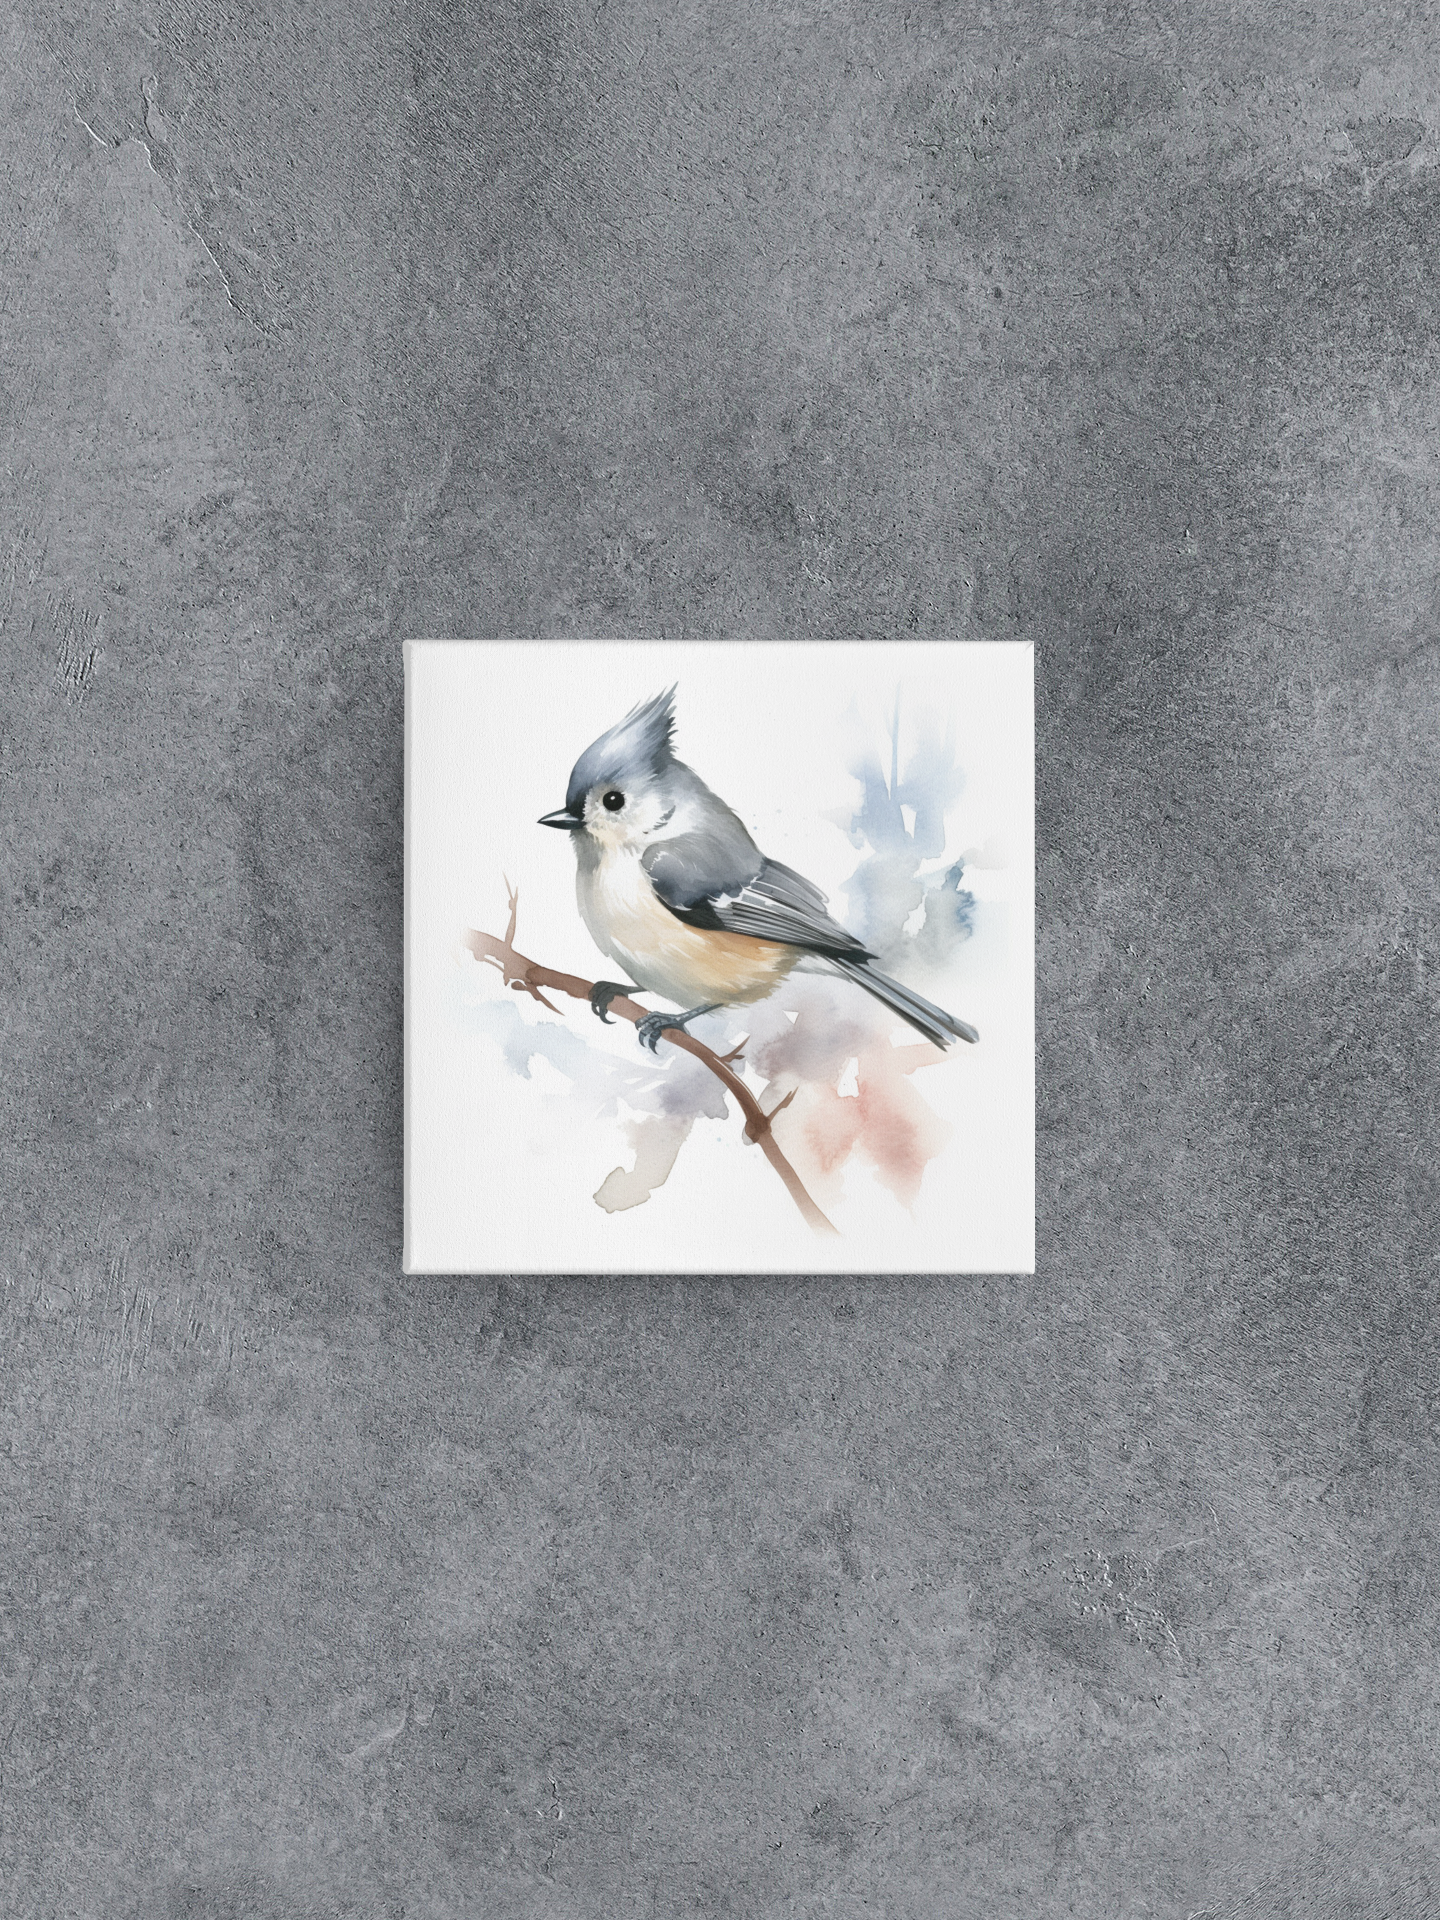 Tufted Titmouse Canvas Wall Art, Watercolor Tufted Titmouse Painting, Bird Lover Gift, Nature Canvas Art, Ready to Hang